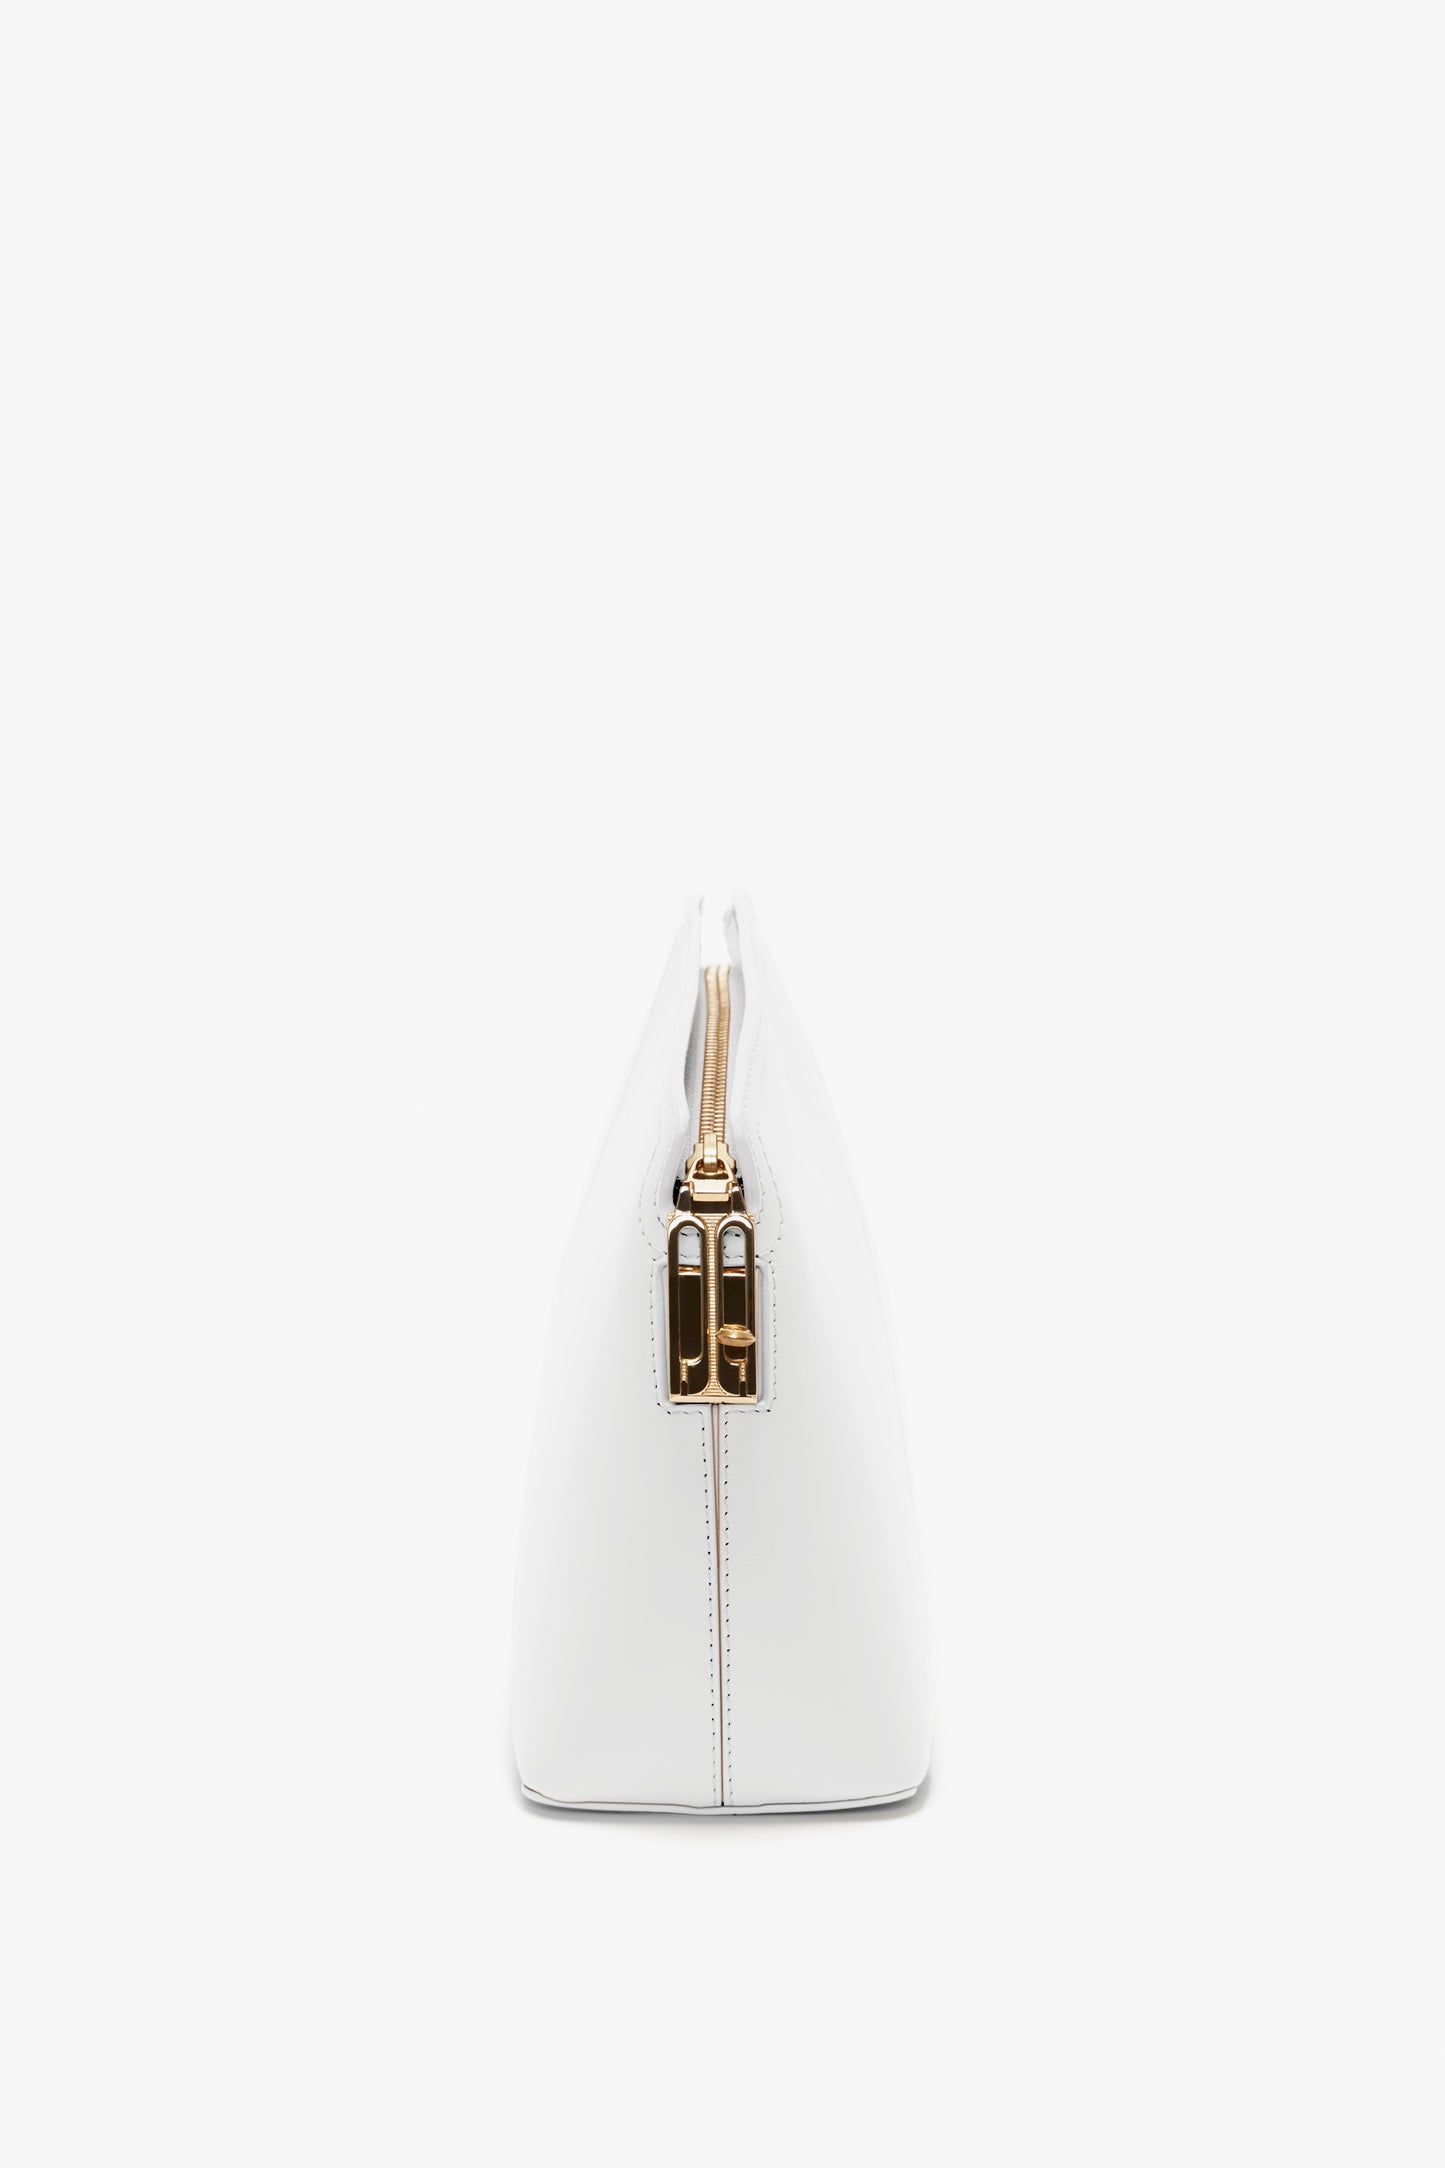 Exclusive Victoria Clutch Bag In White Leather